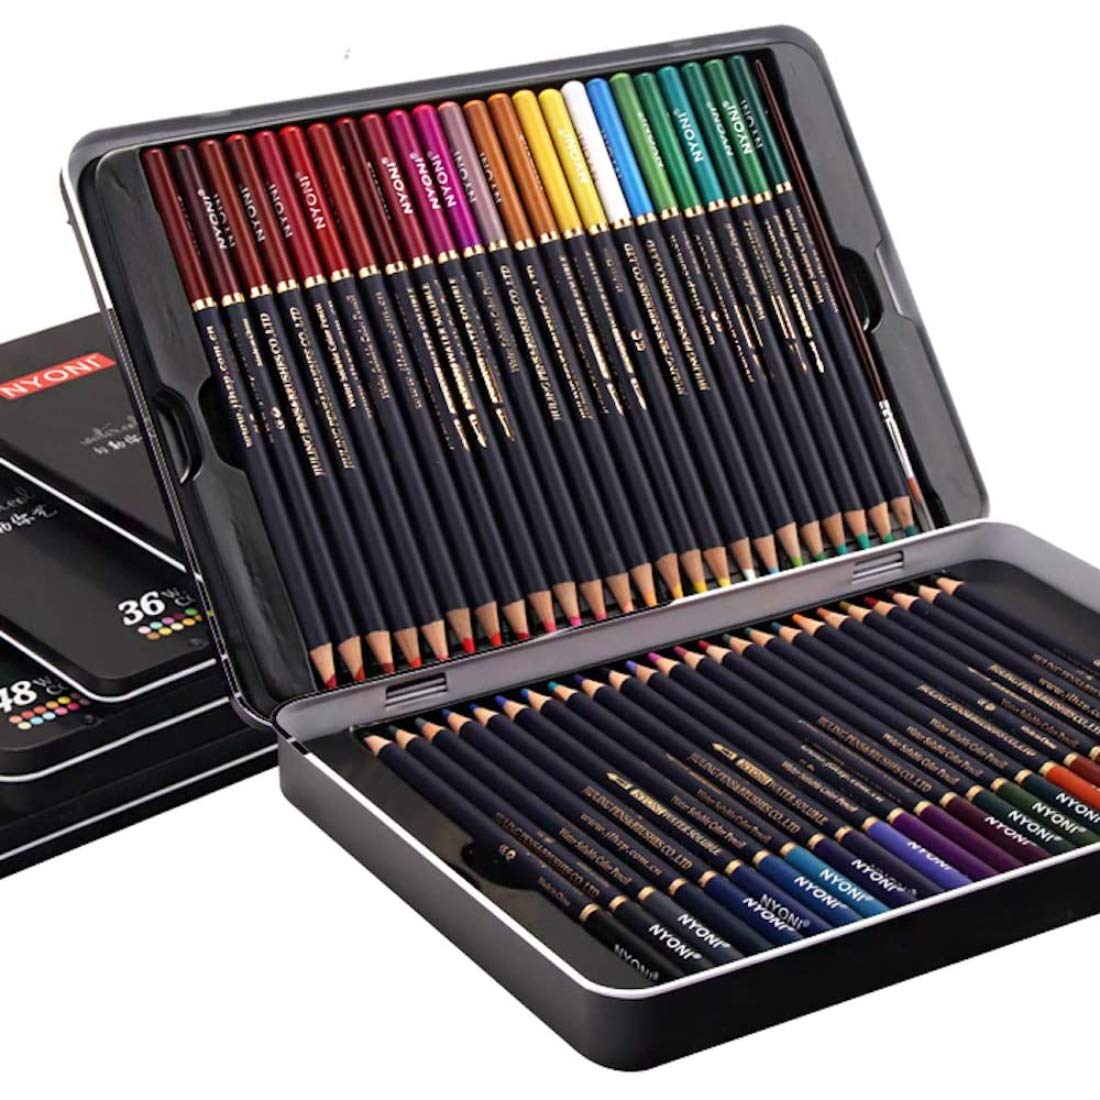 Ondesk Artics Artists' Fine Art Watercolour Pencil Set Tin Box of 48 Assorted Shades | Perfect For Artists', Professionals & Students| Ideal For Sketching, Painting, Drawing, Shading & Illustrations